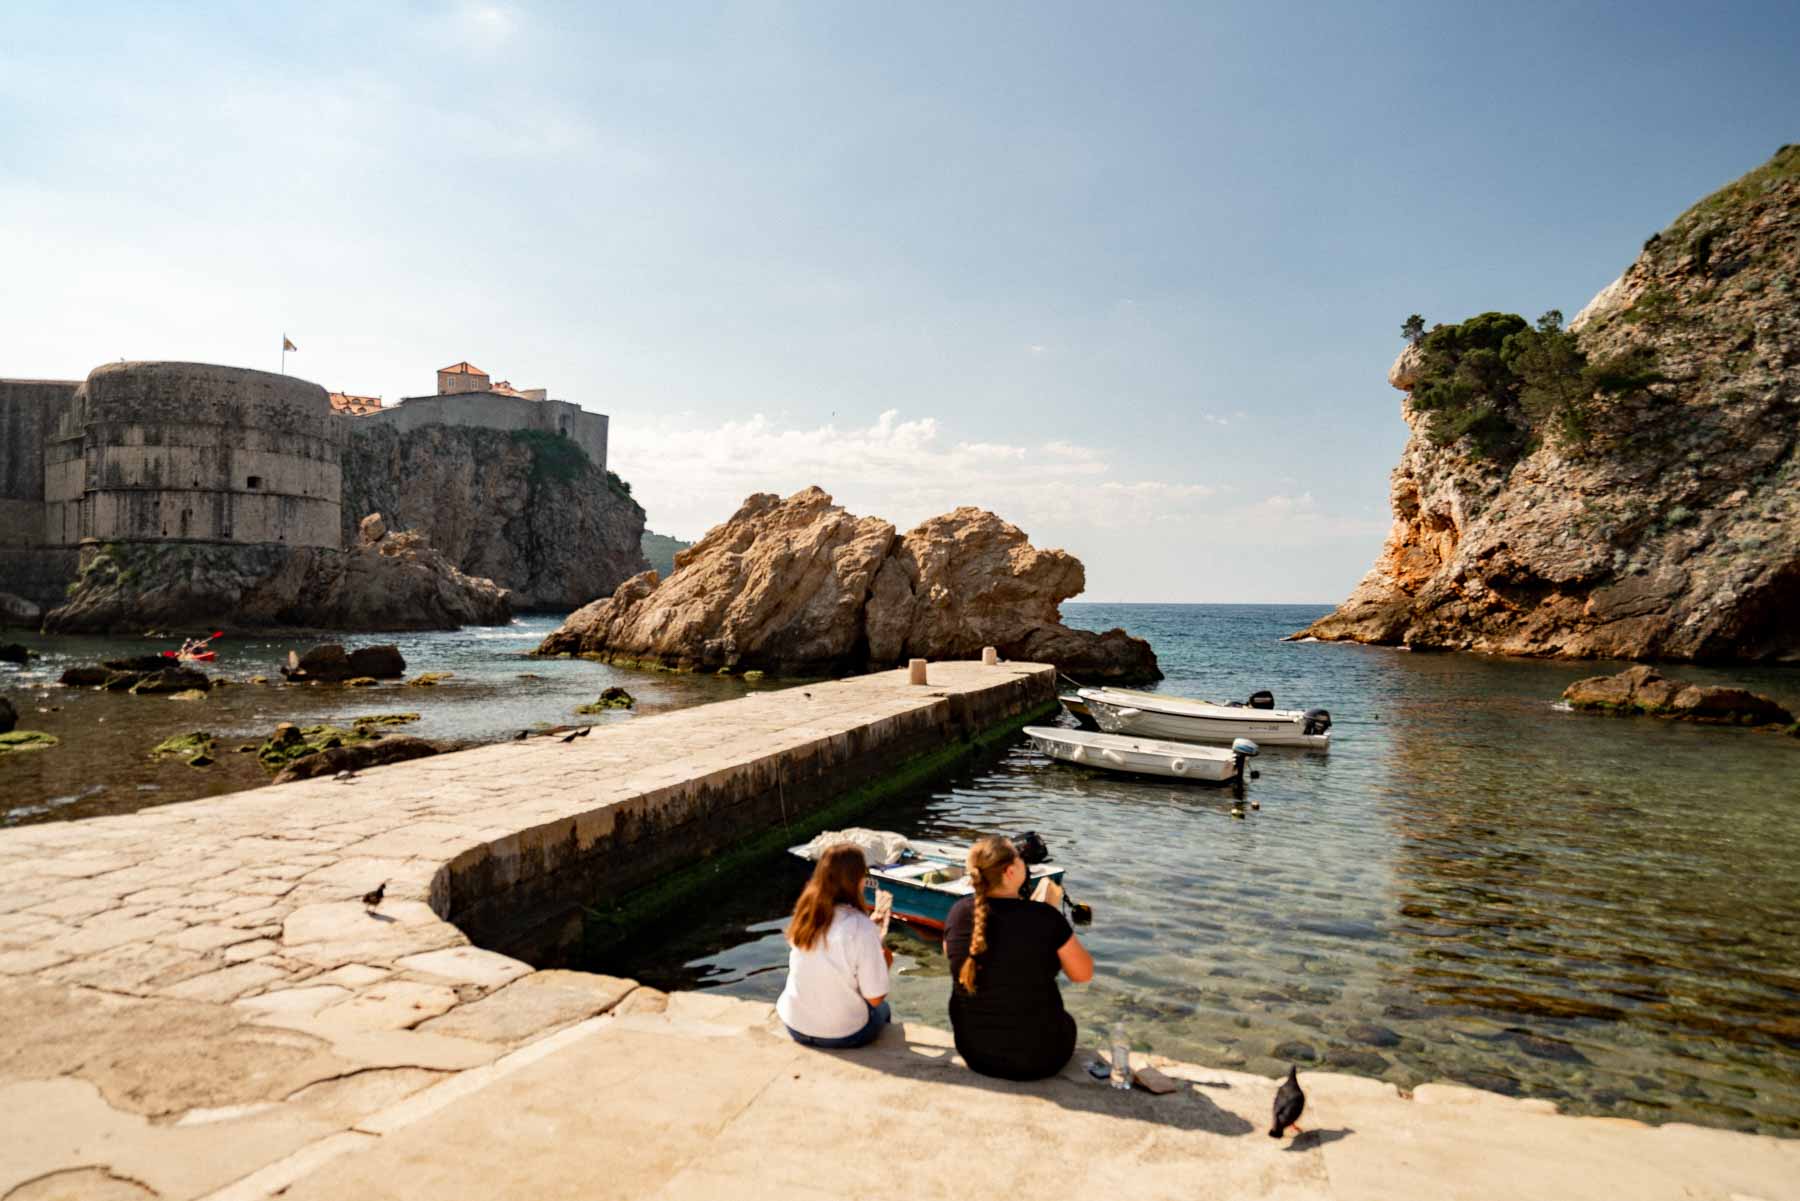 Dubrovnik Game of Thrones filming locations